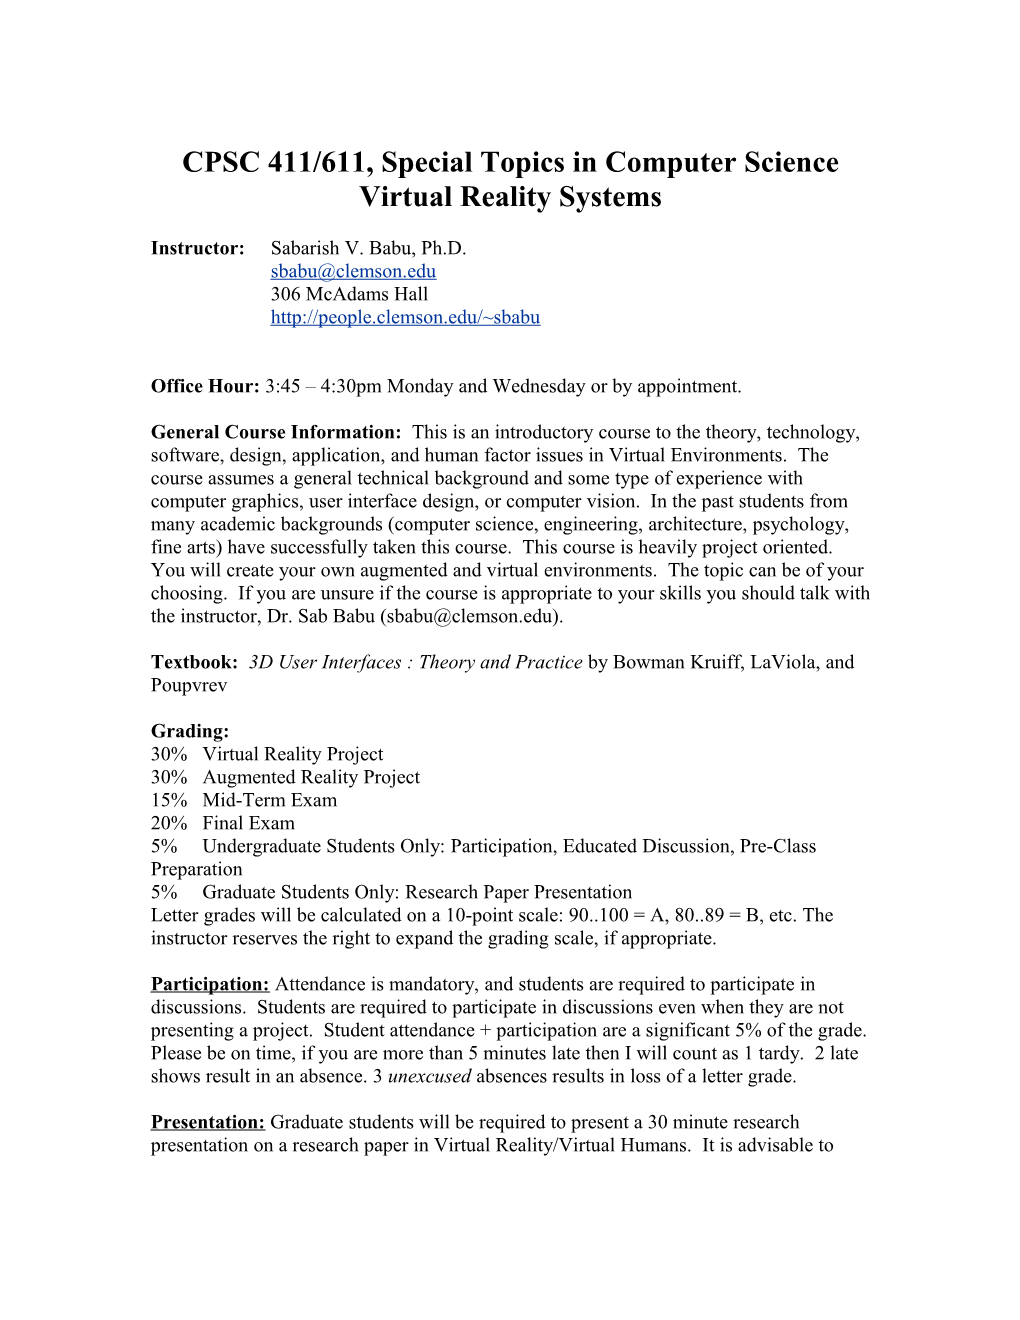 CPSC 411/611, Special Topics in Computer Science